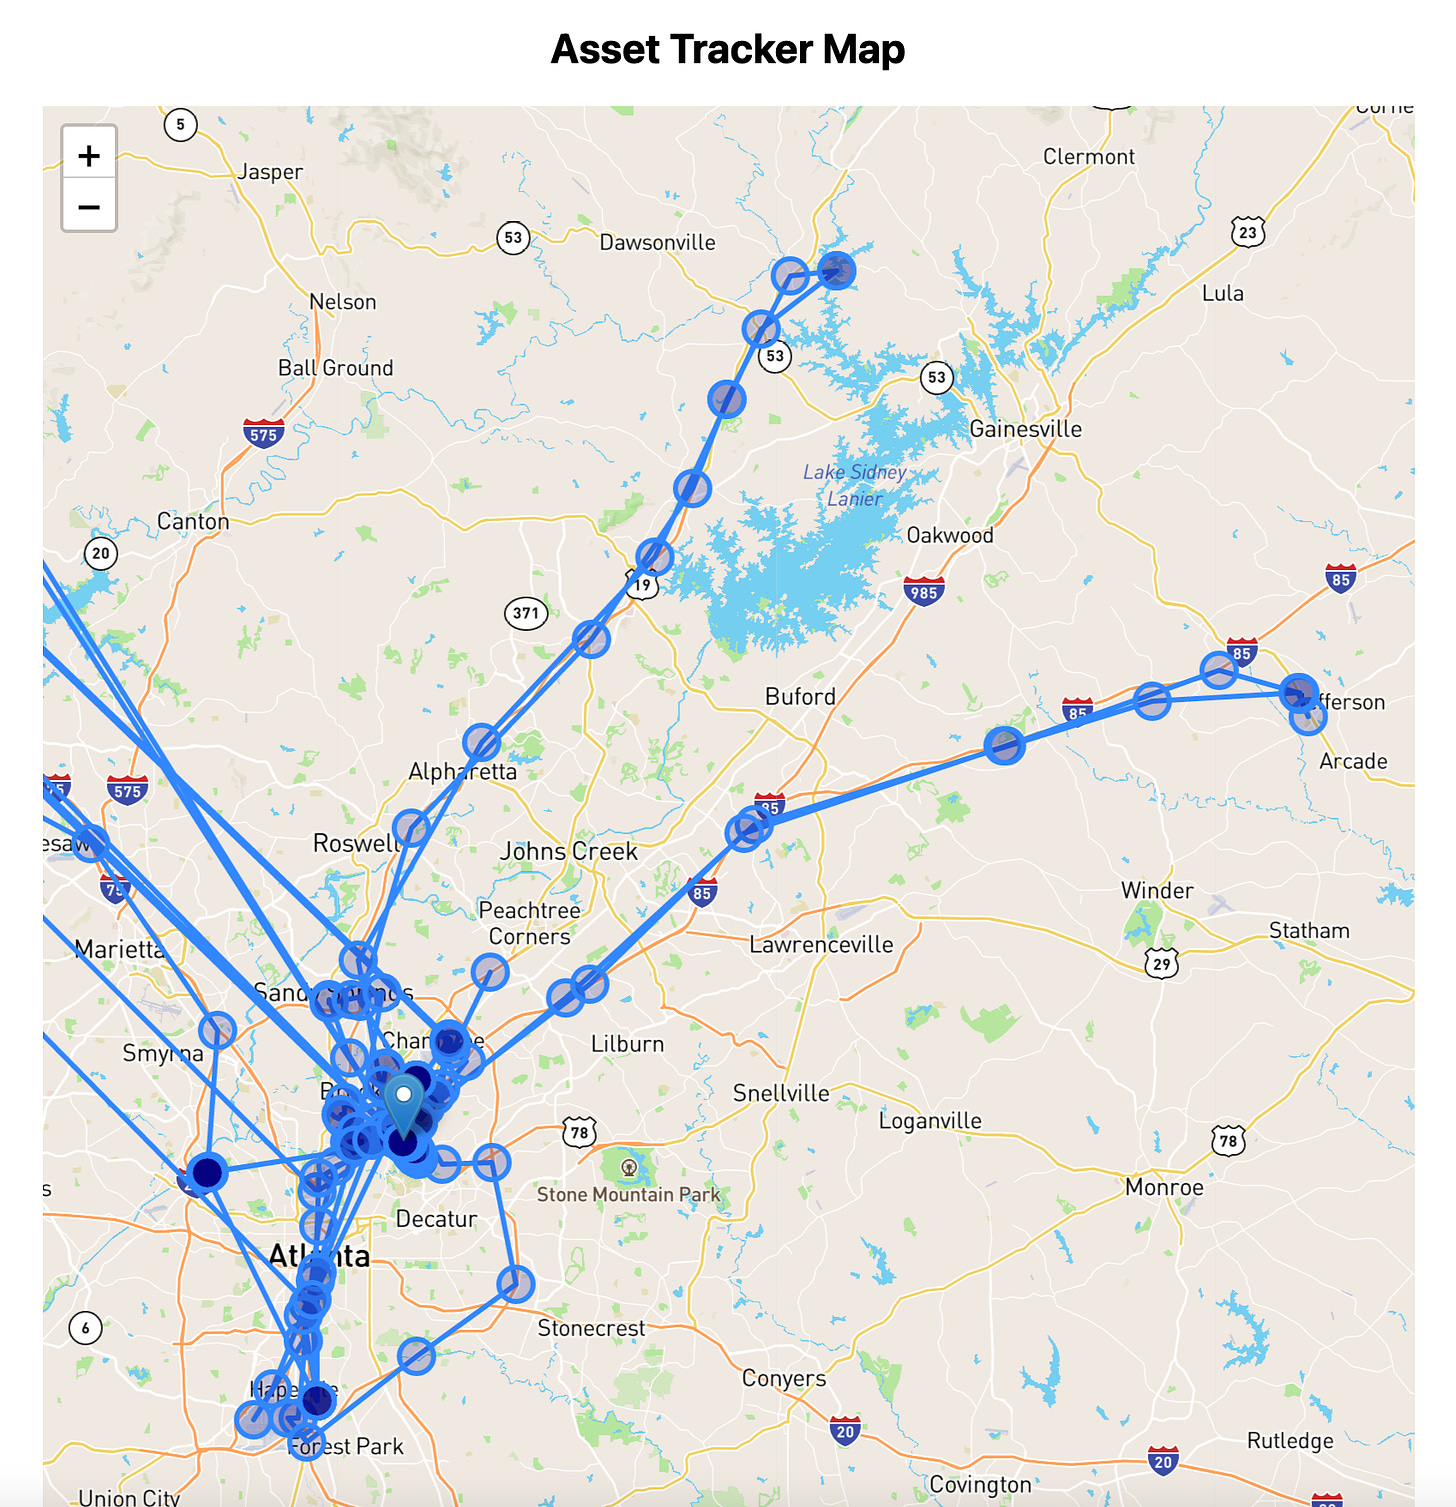 Custom map display in Next.js application using React Leaflet to display previous locations.